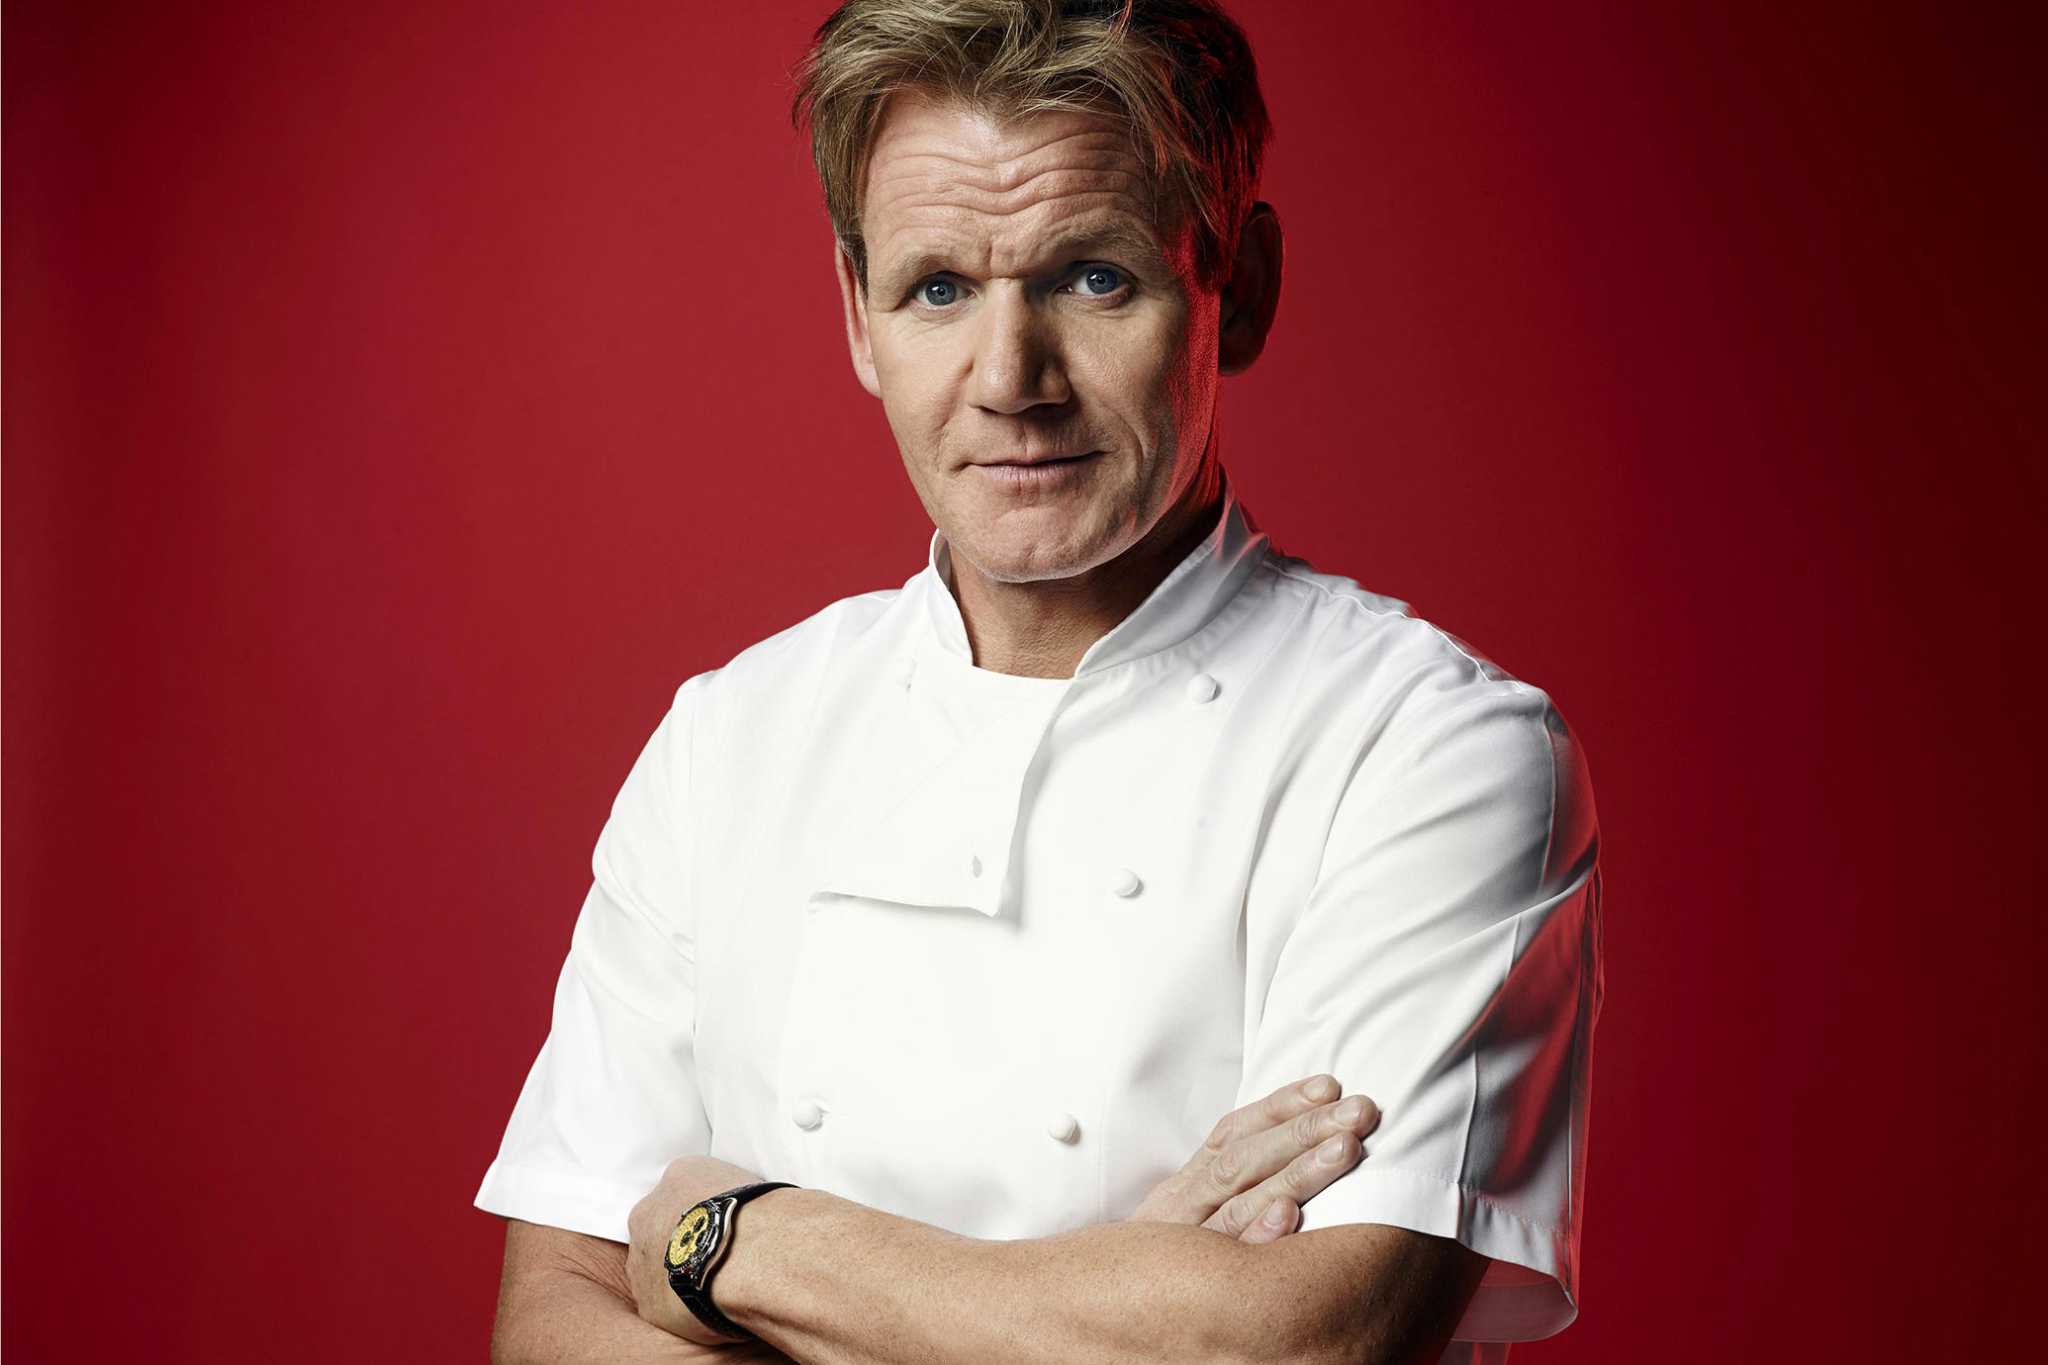 Known for advising restaurateurs on TV, celebrity chef Gordon Ramsay is now...